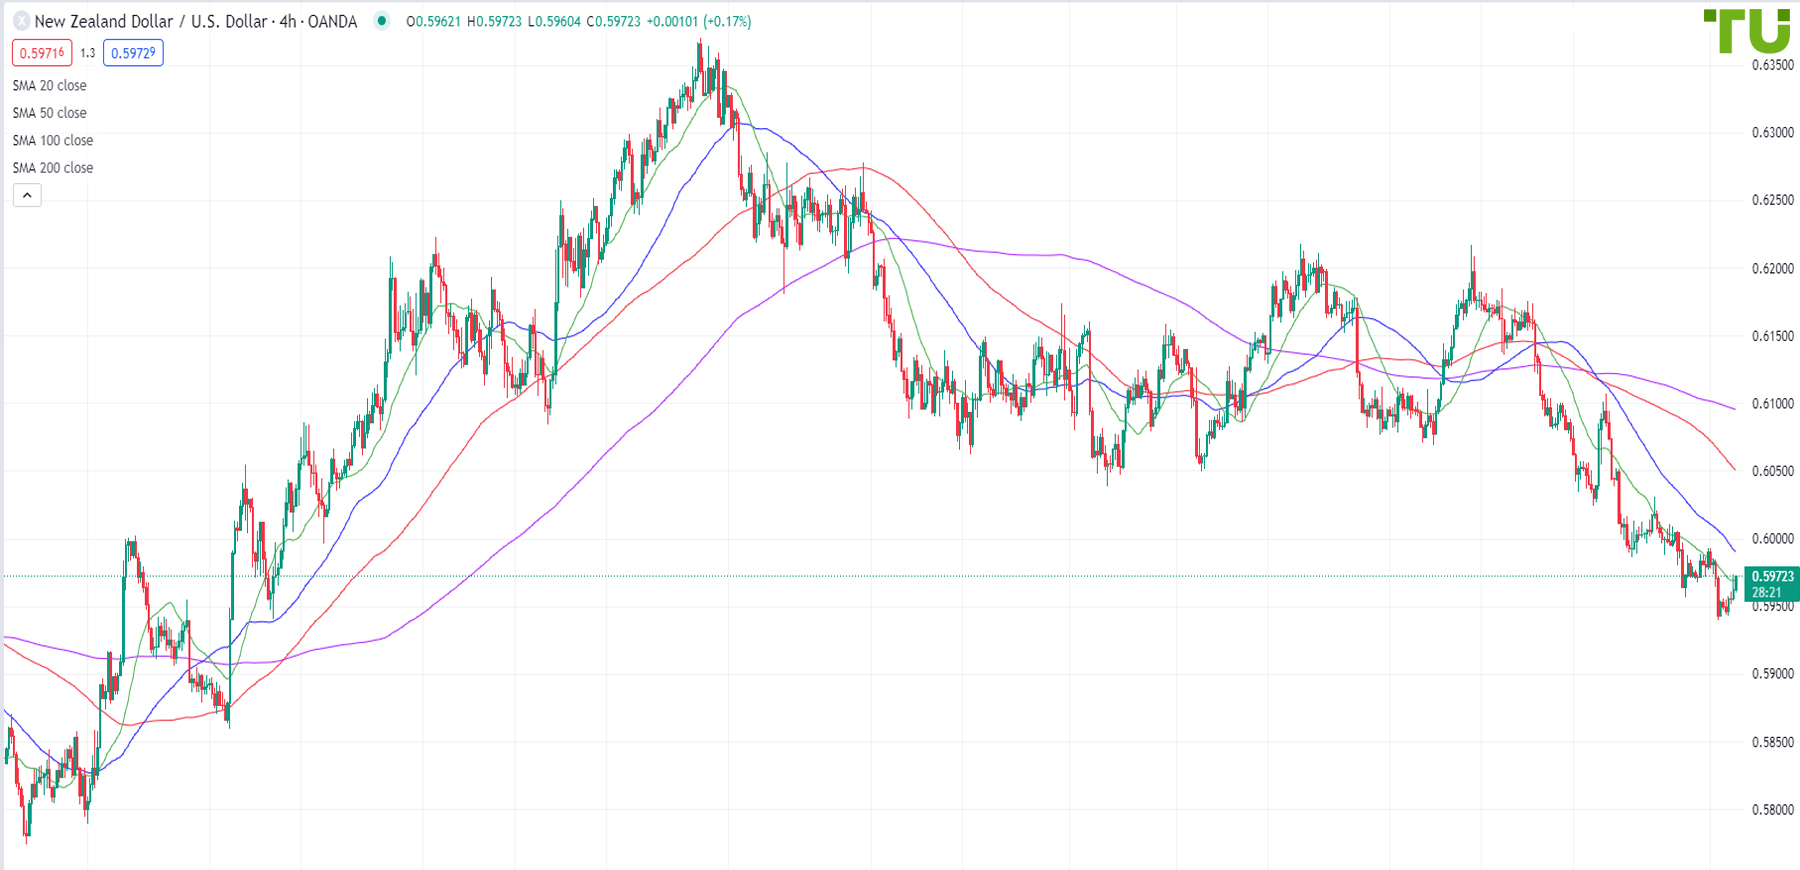 Kiwi/dollar pulled back to the resistance at 0.5970